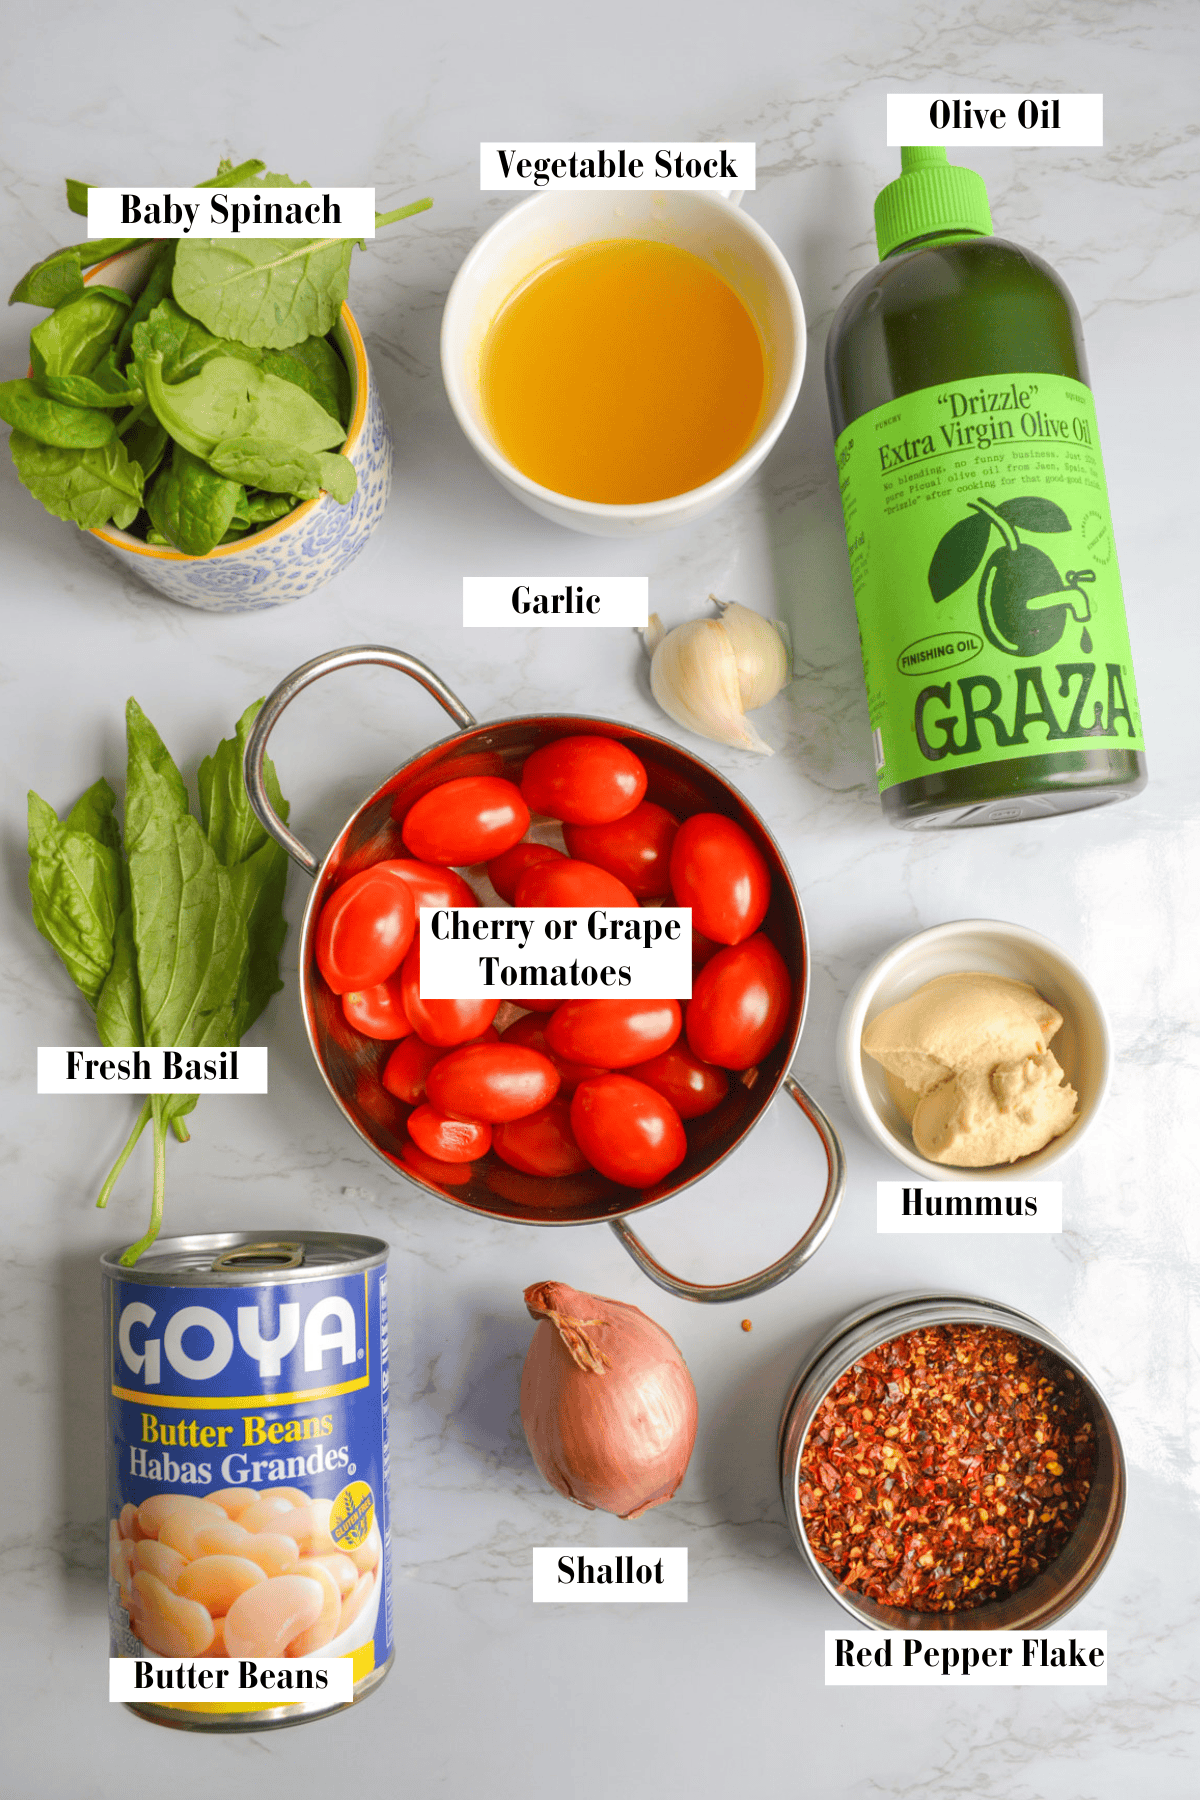 Ingredients needed to make this recipe in small bowls on a marble surface.